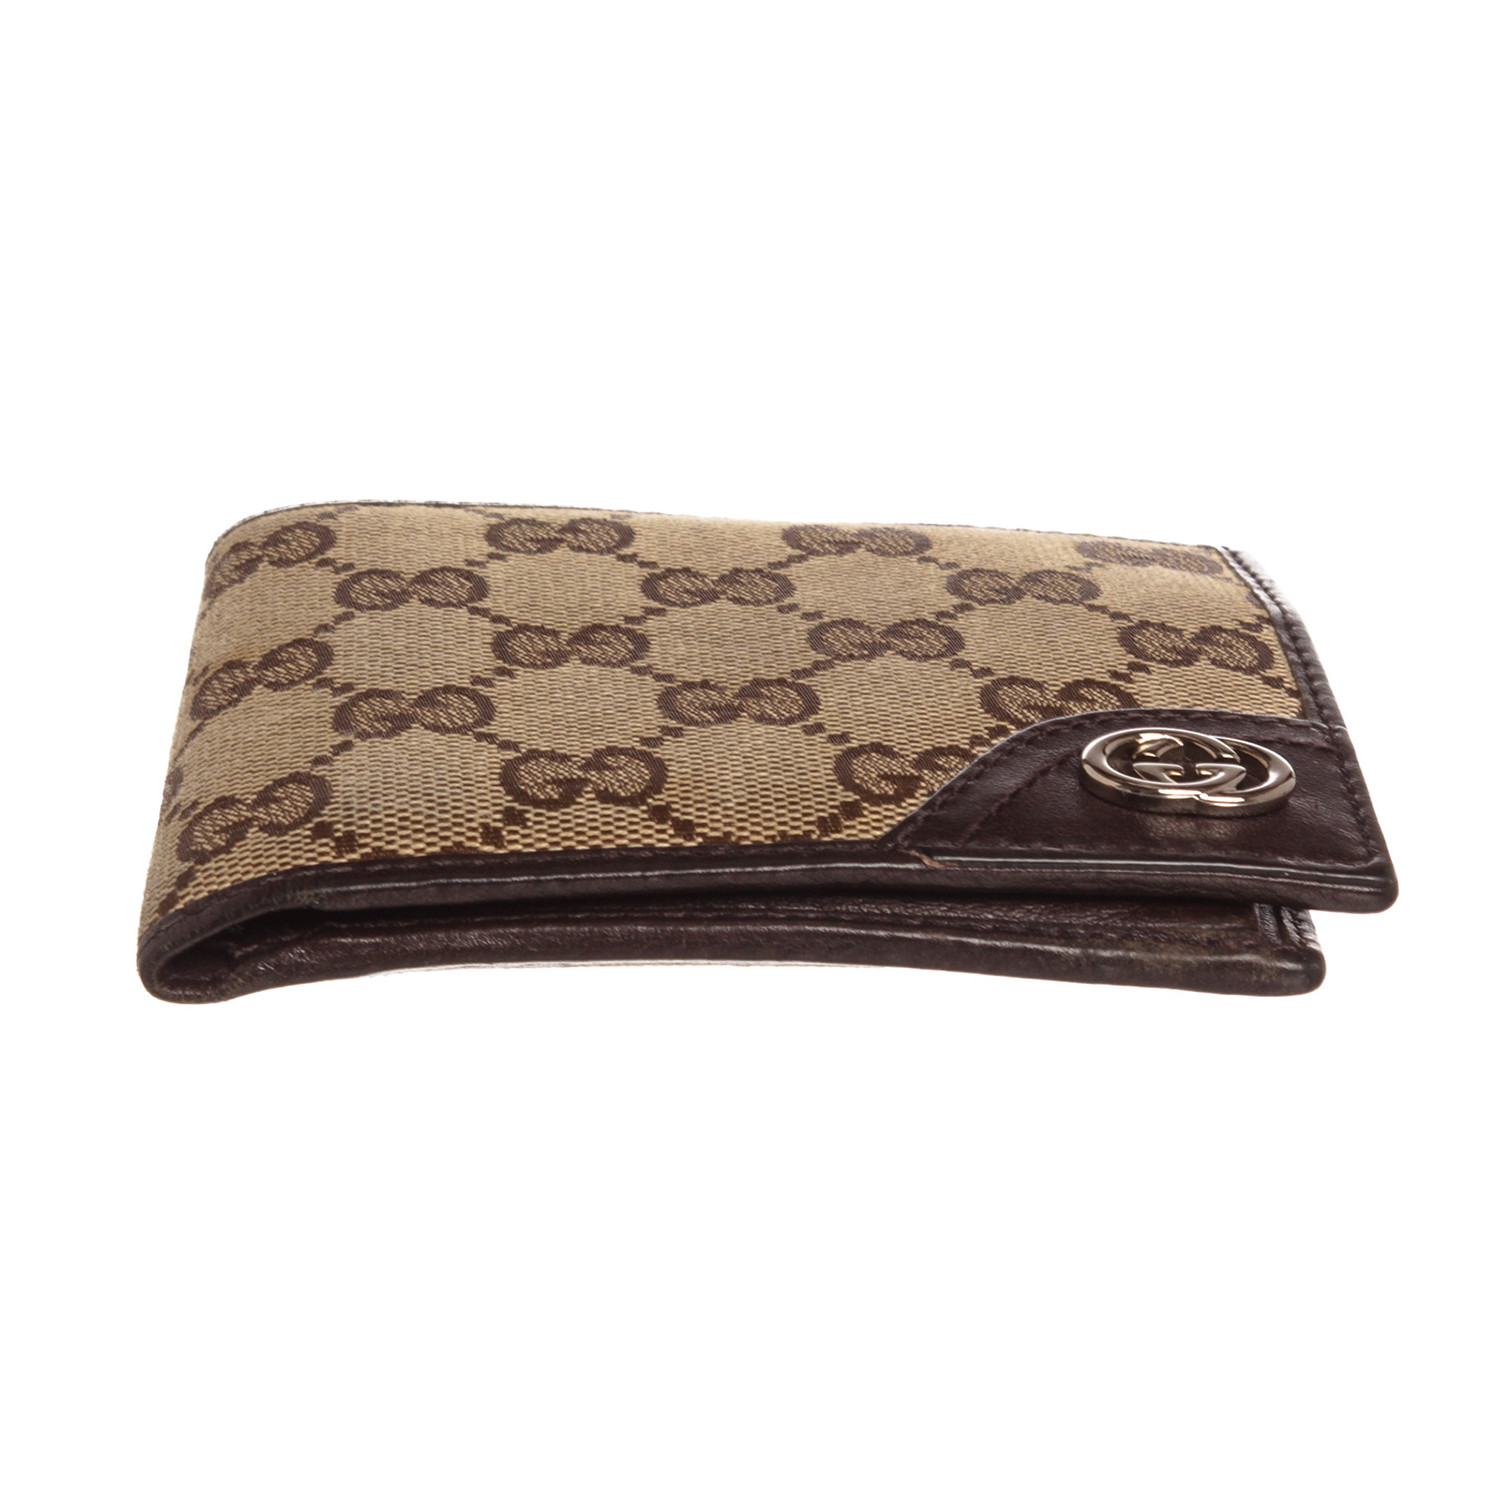 Gucci // Beige Tan GG Canvas Leather Trim Bifold Wallet // 1816712067 // Pre-Owned - Vintage ...